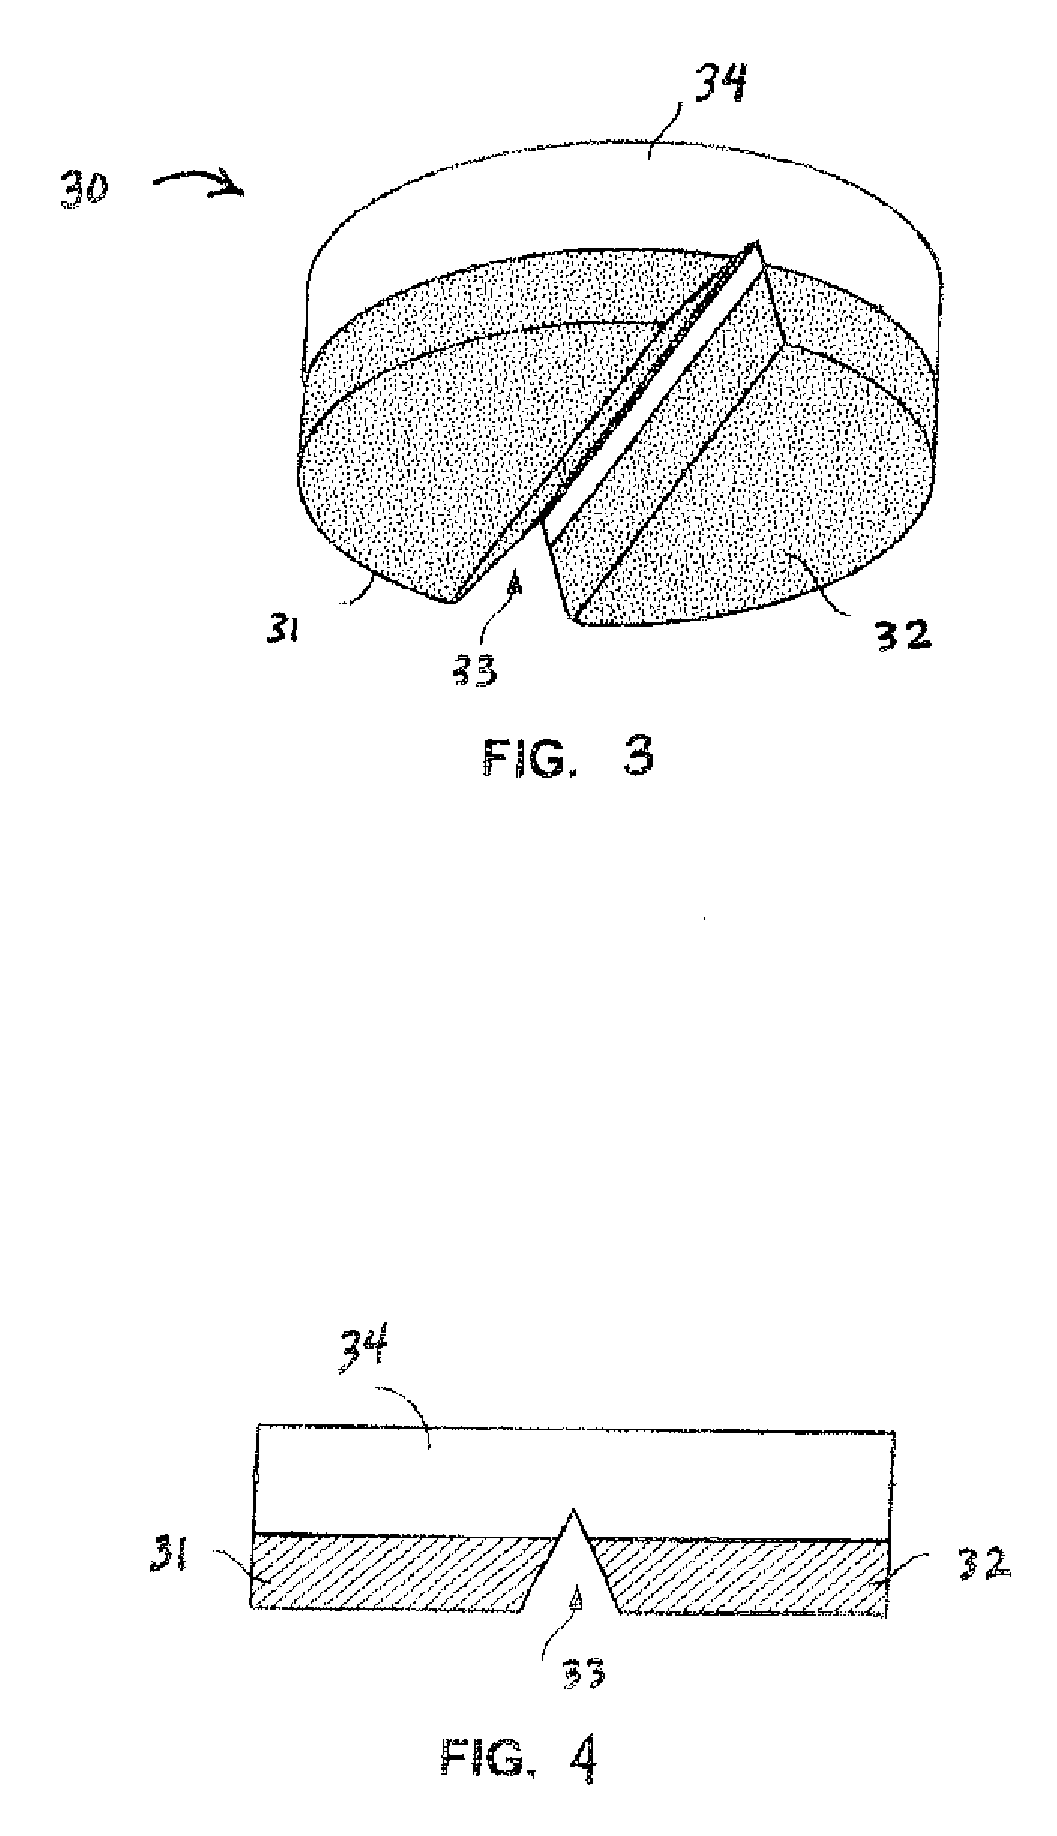 Dosage forms and methods using ethacrynic acid